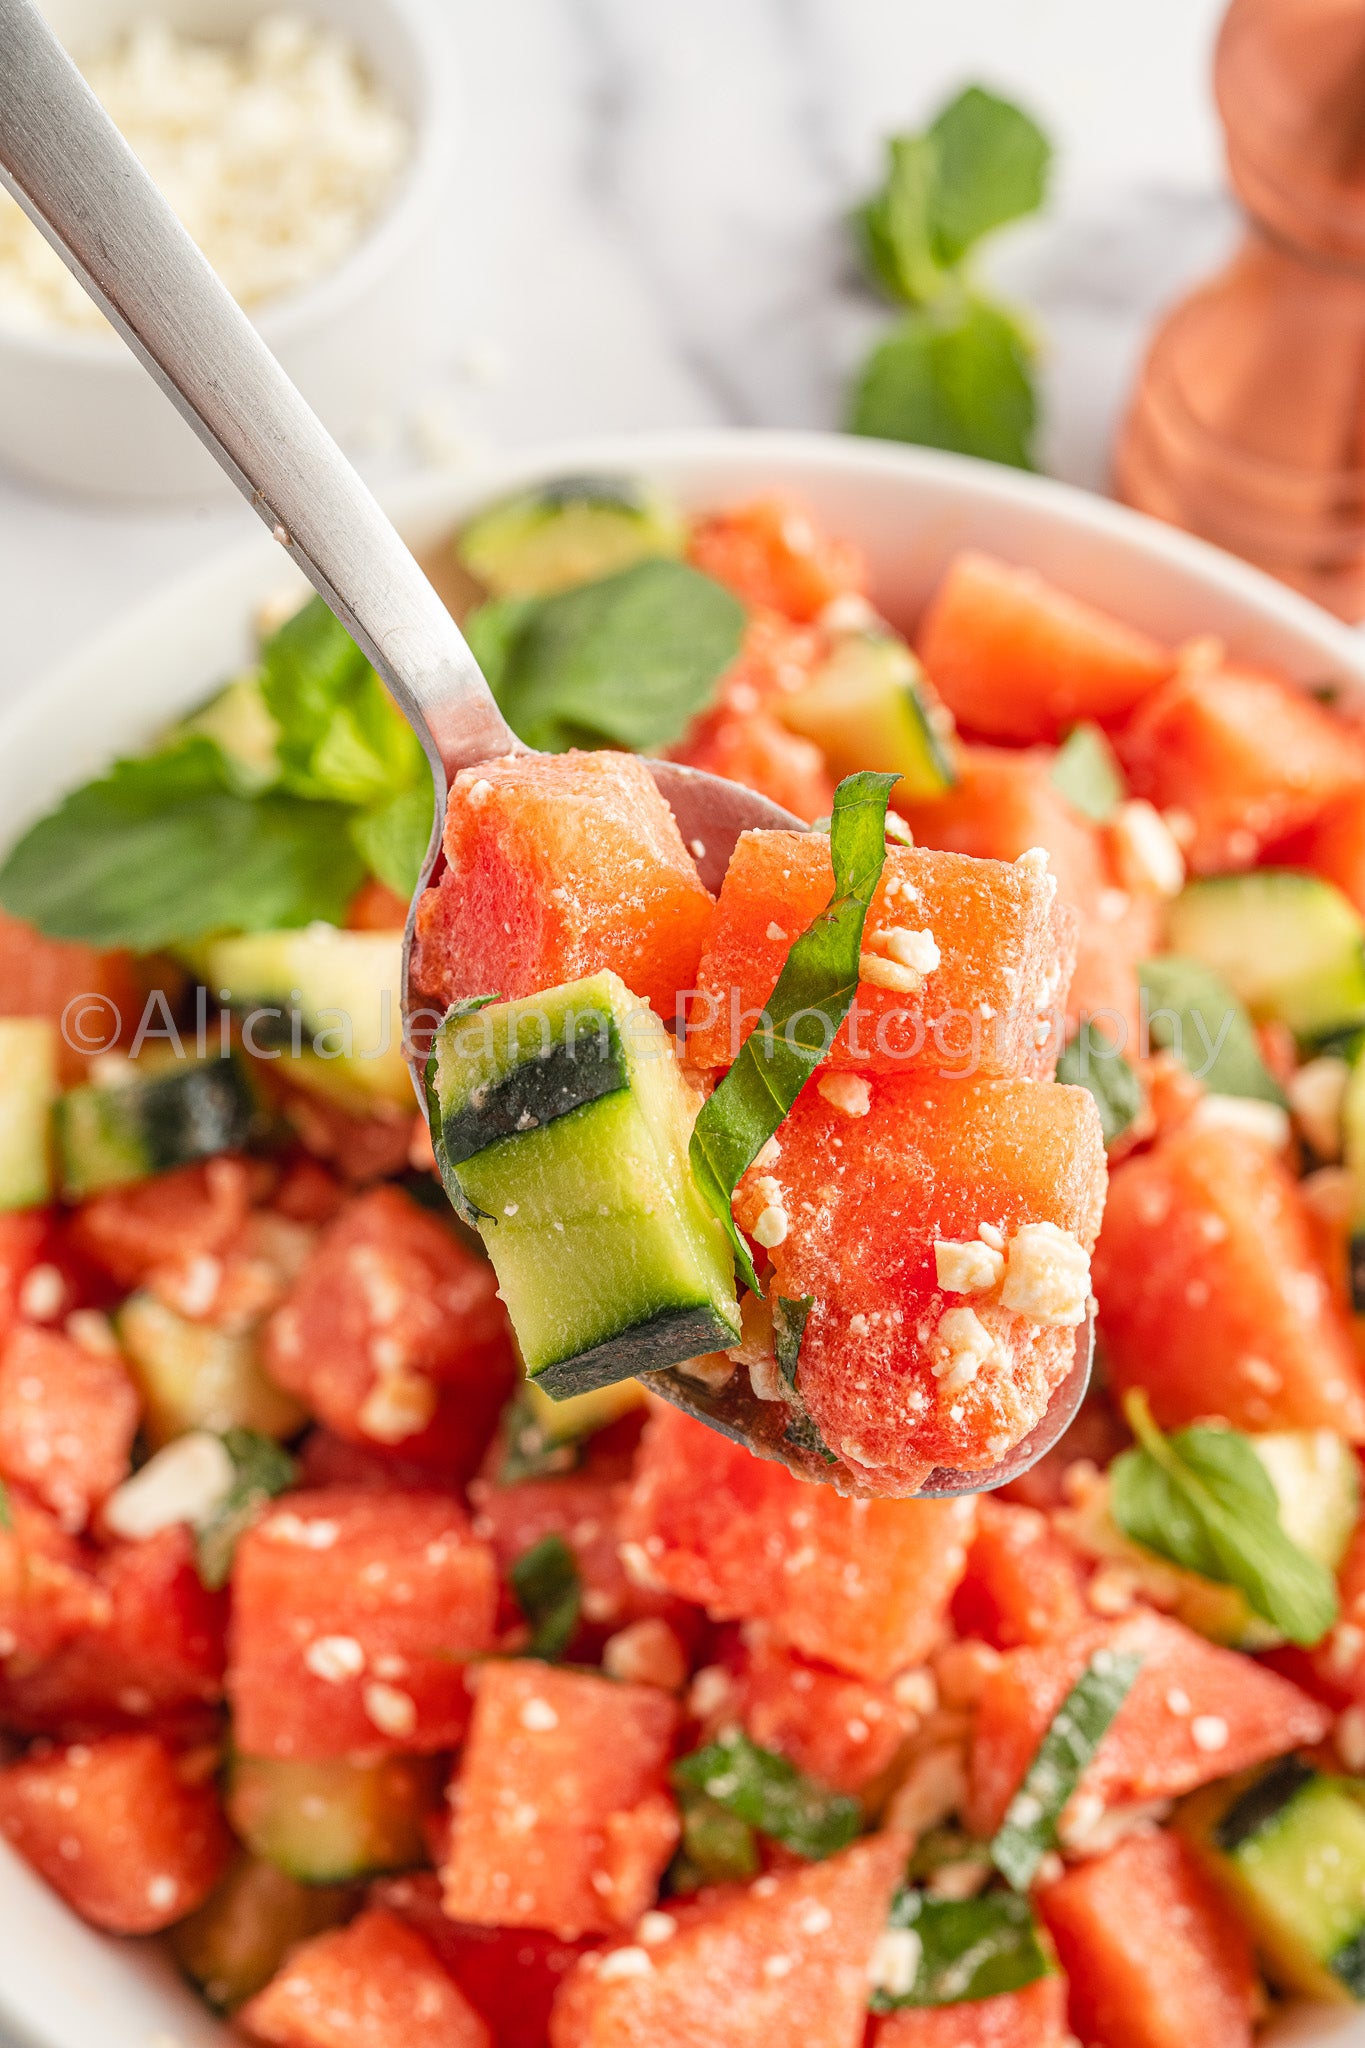 Watermelon Salad with Feta and Mint - *EXCLUSIVE*